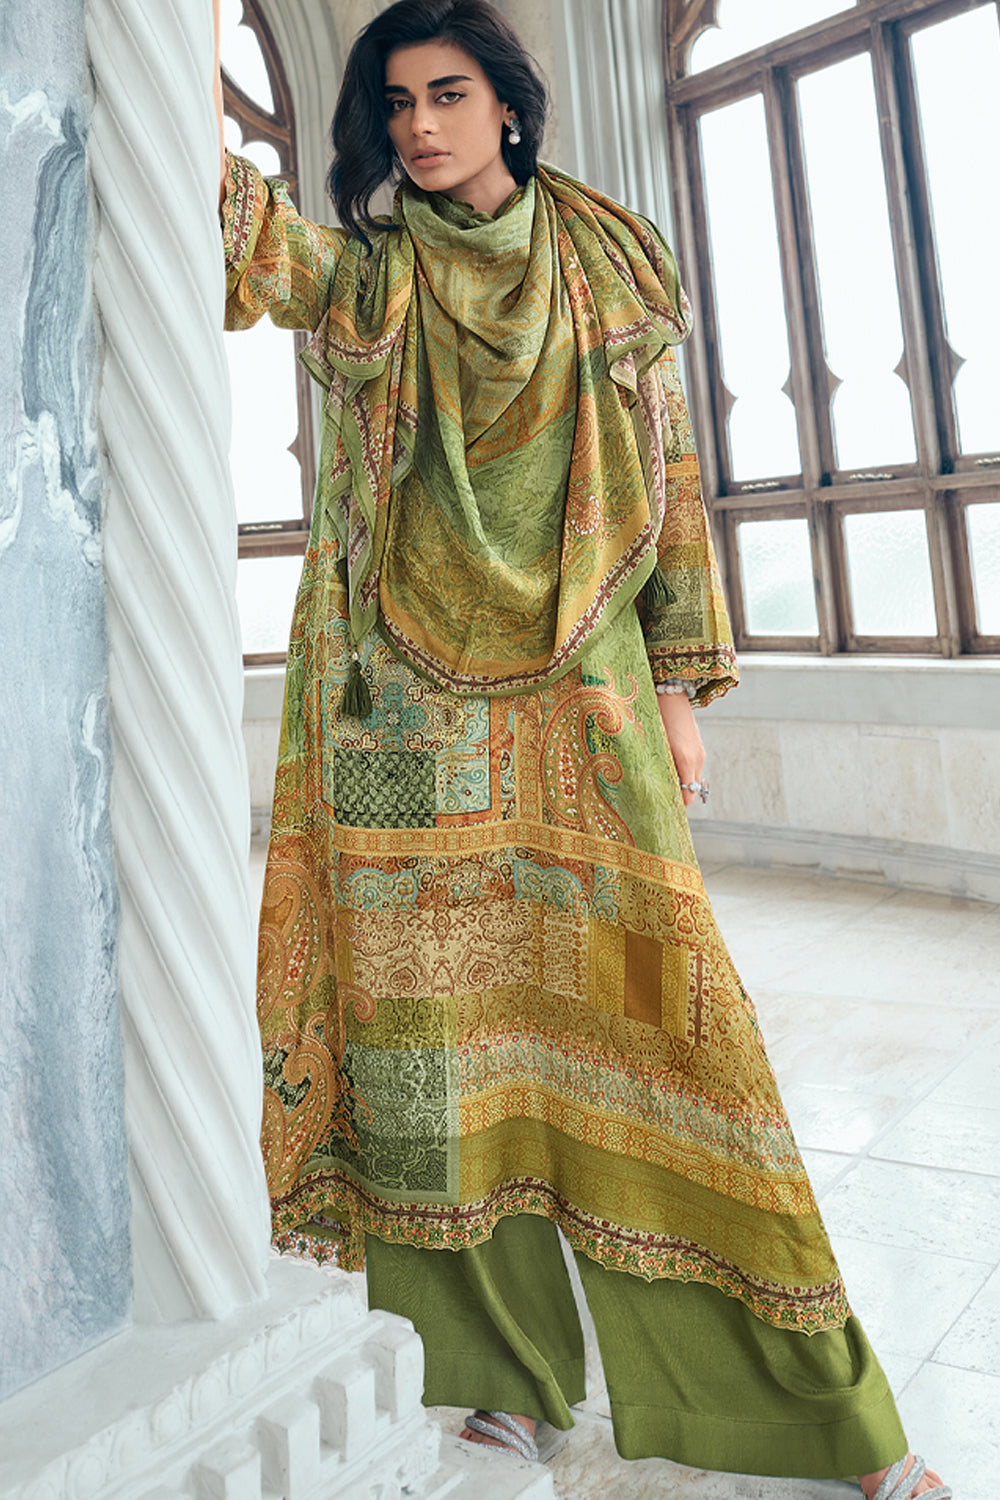 Sage Green Colour Printed Muslin Unstitched Suit Material